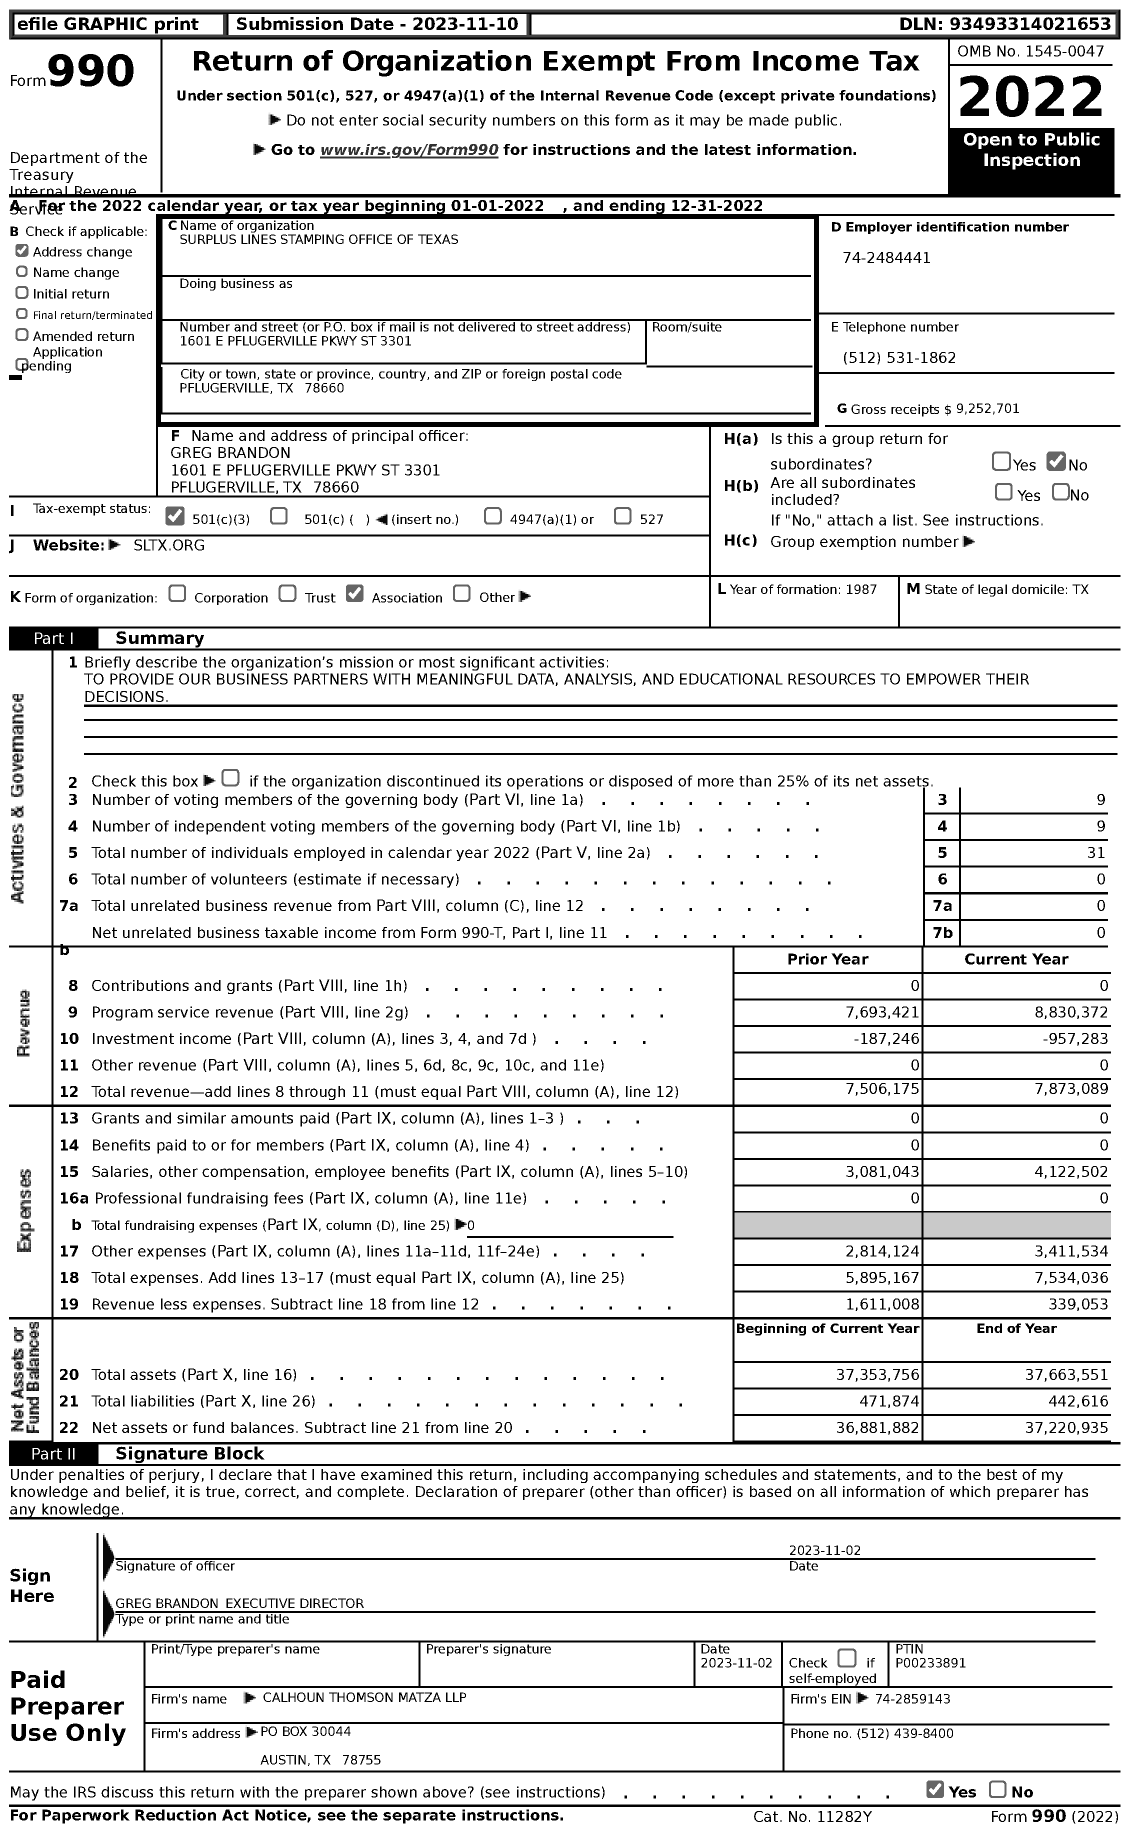 Image of first page of 2022 Form 990 for Surplus Lines Stamping Office of Texas (SLSOT)